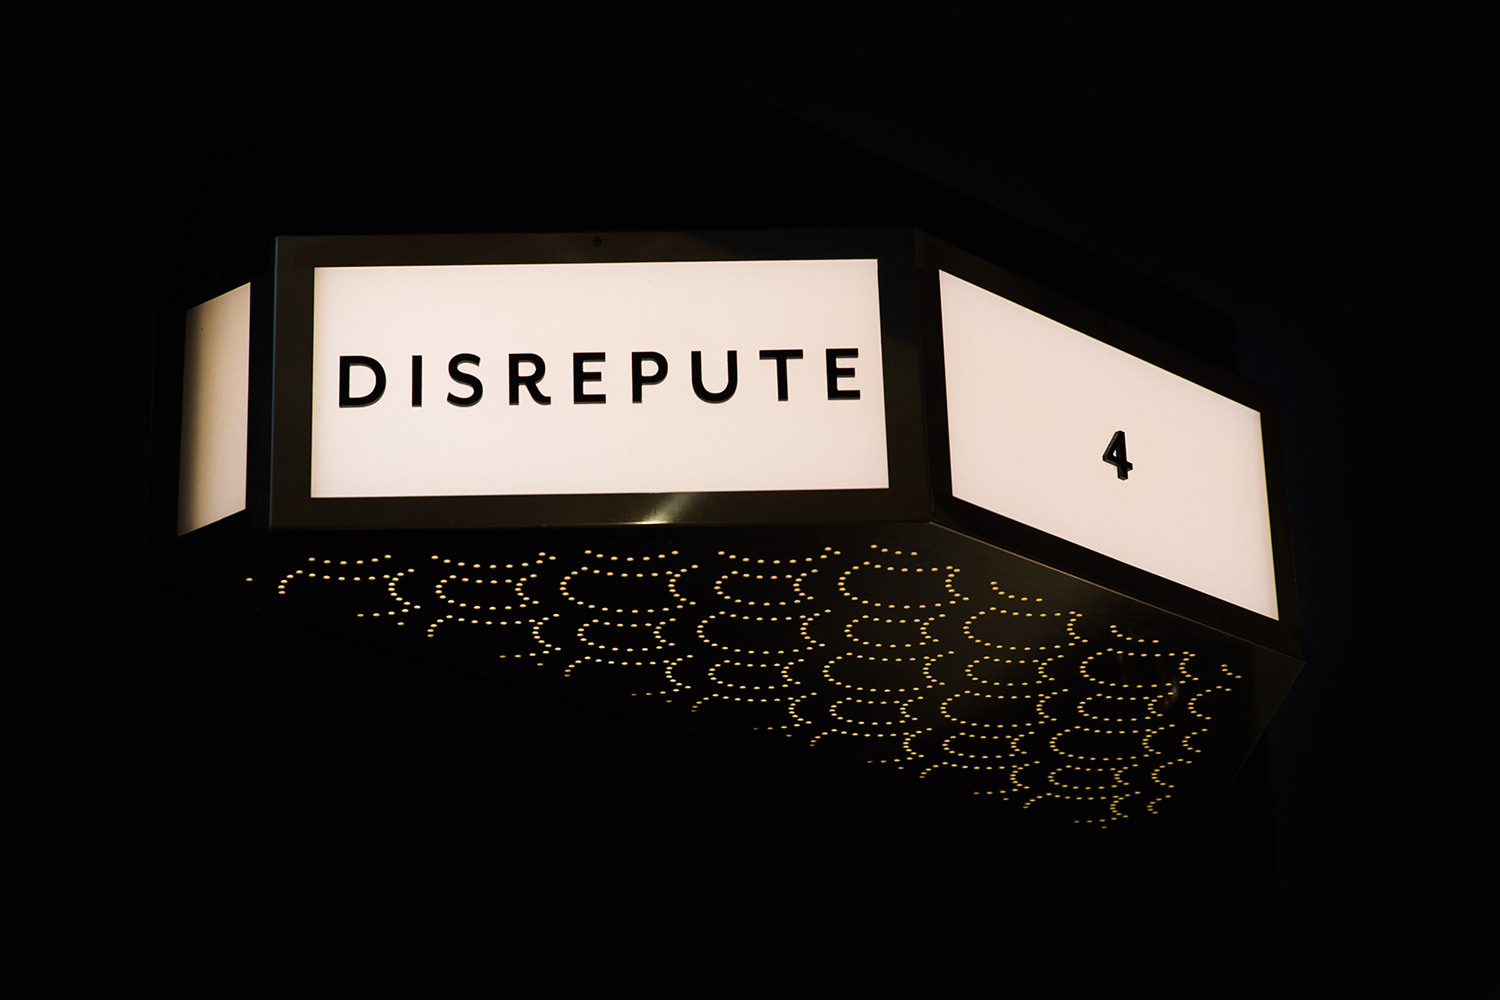 Logotype and signage designed by London-based studio Two Times Elliott for Soho members bar Disrepute